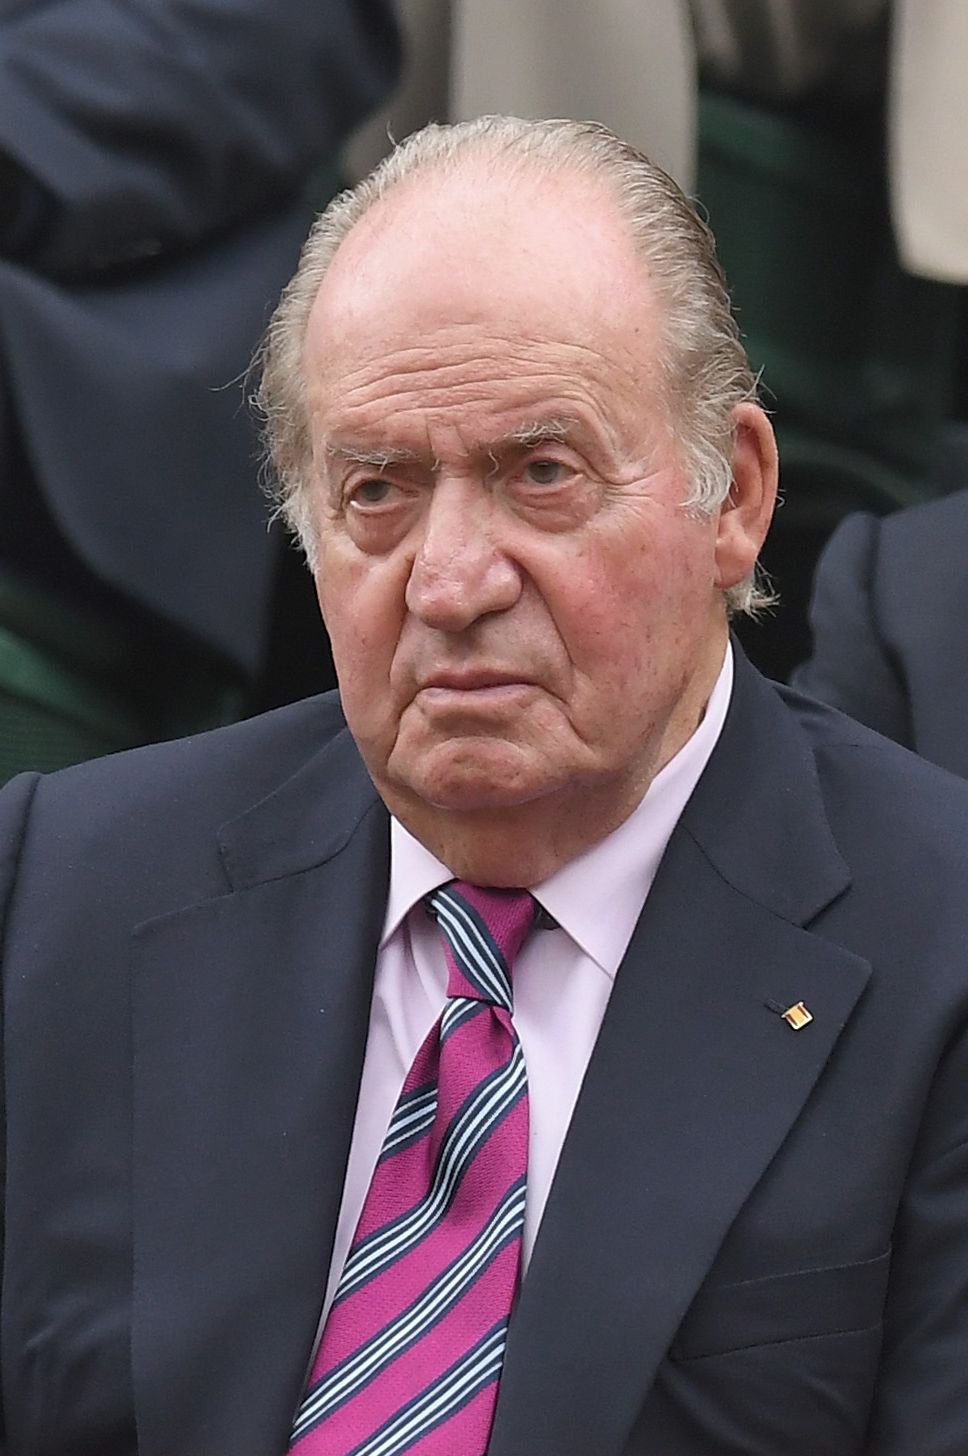 london, england   july 15  juan carlos i, former king of spain attends day twelve of the wimbledon tennis championships at the all england lawn tennis and croquet club on on july 15, 2017 in london, united kingdom  photo by karwai tangwireimage